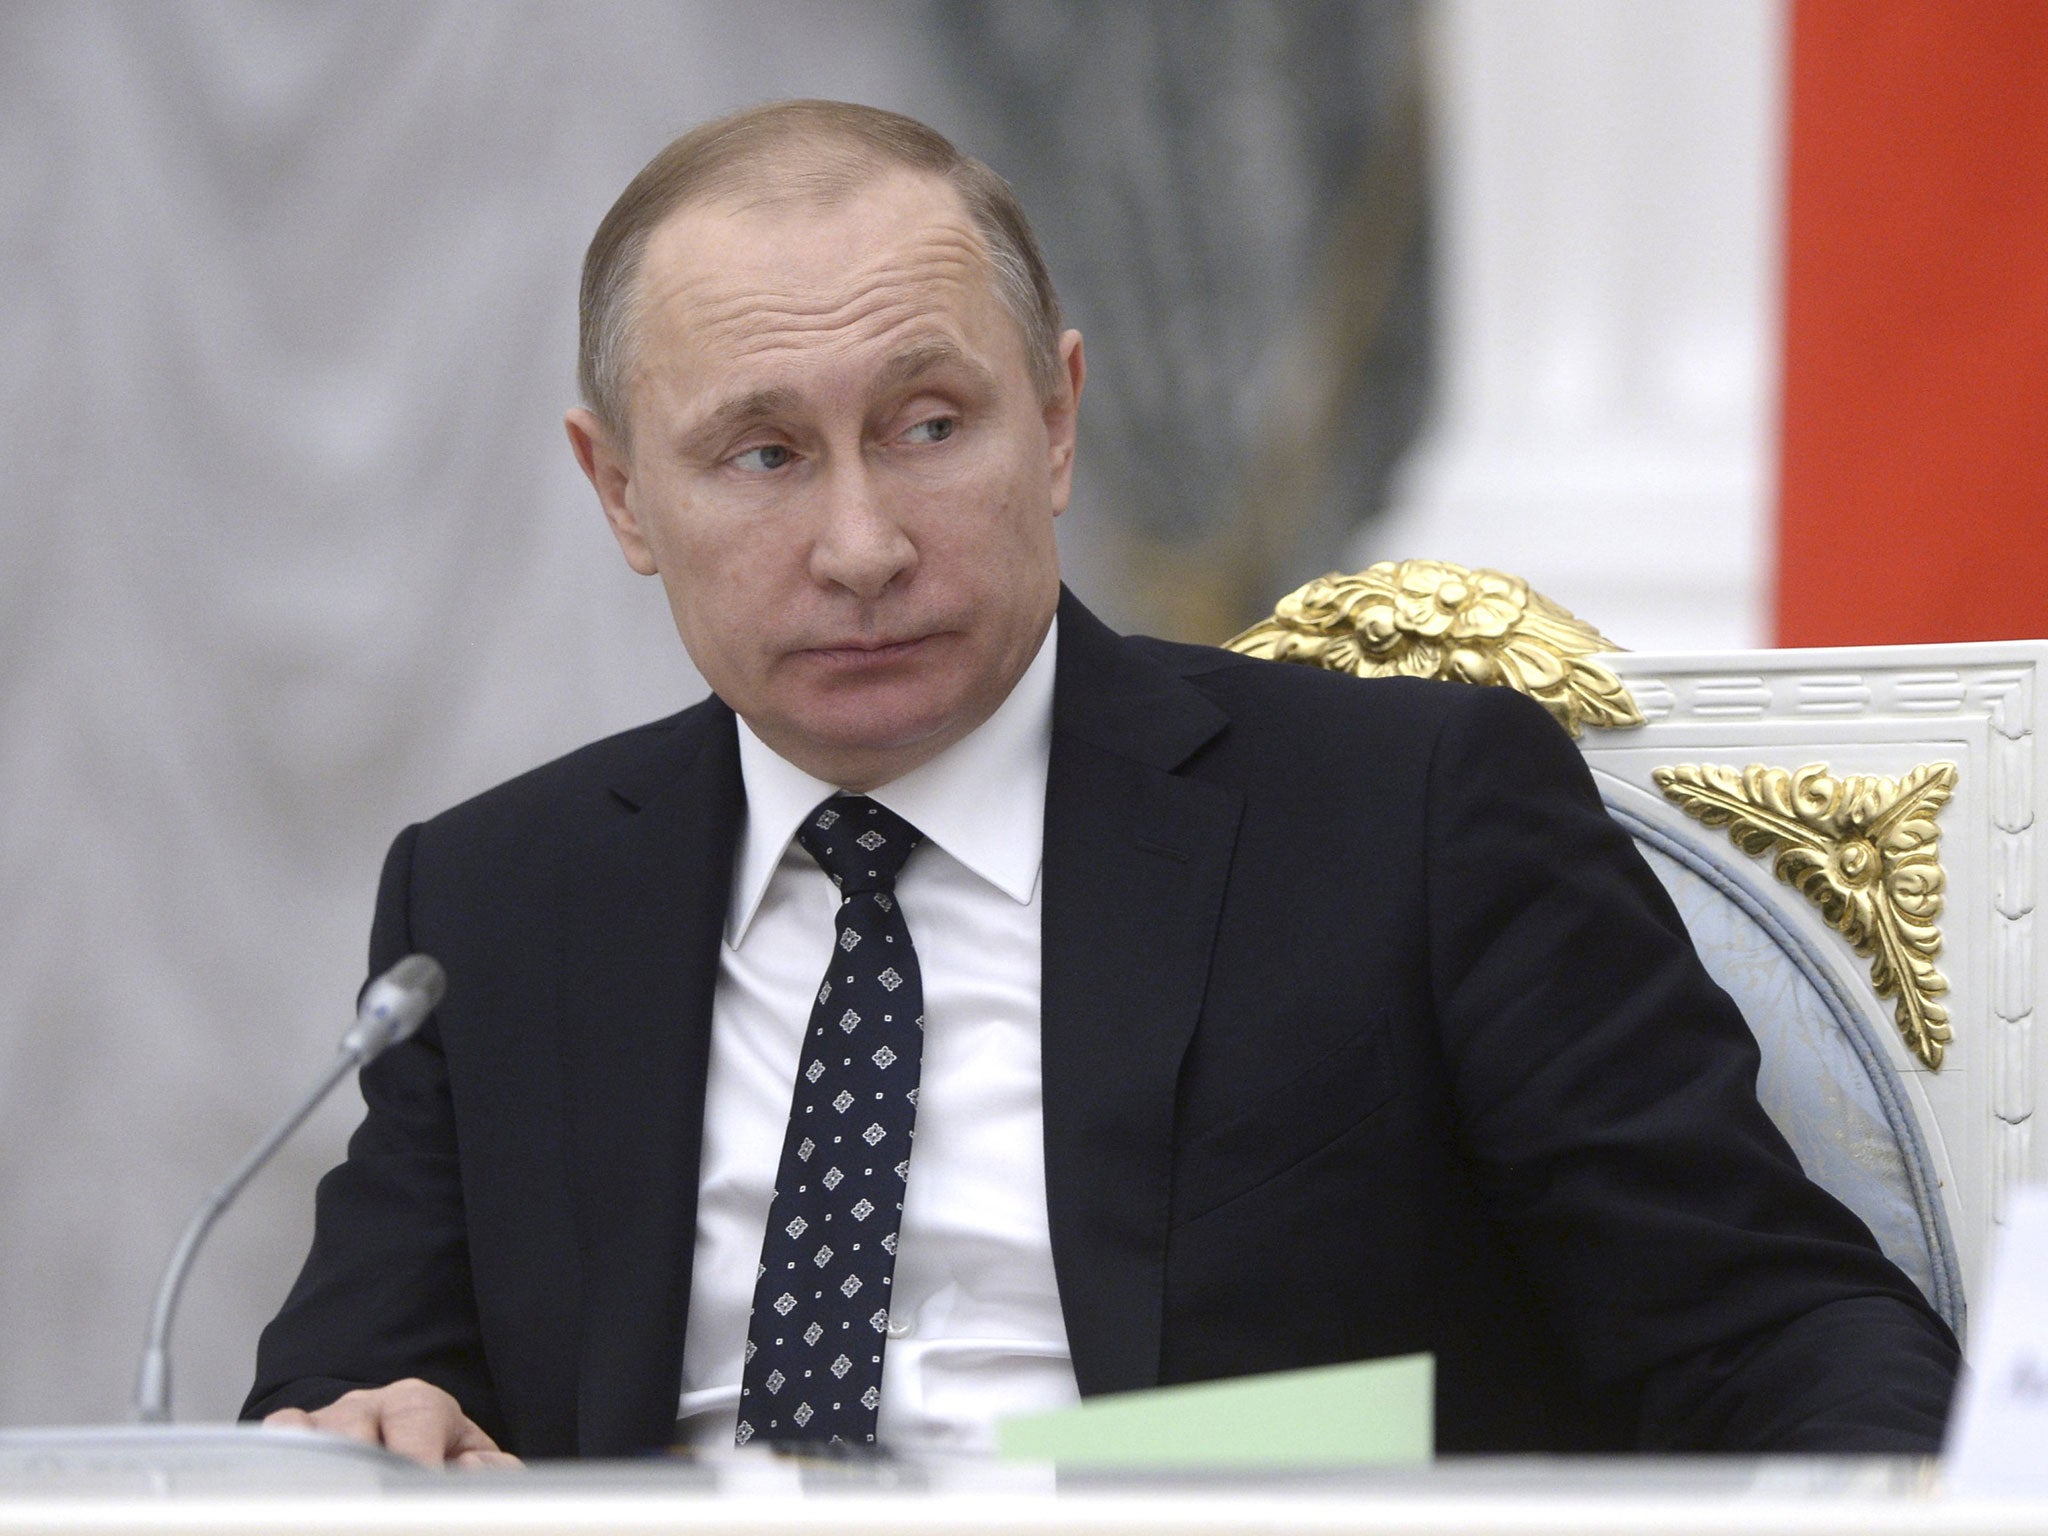 Vladimir Putin, chairing a meeting at the Kremlin last week, faces accusations of corruption